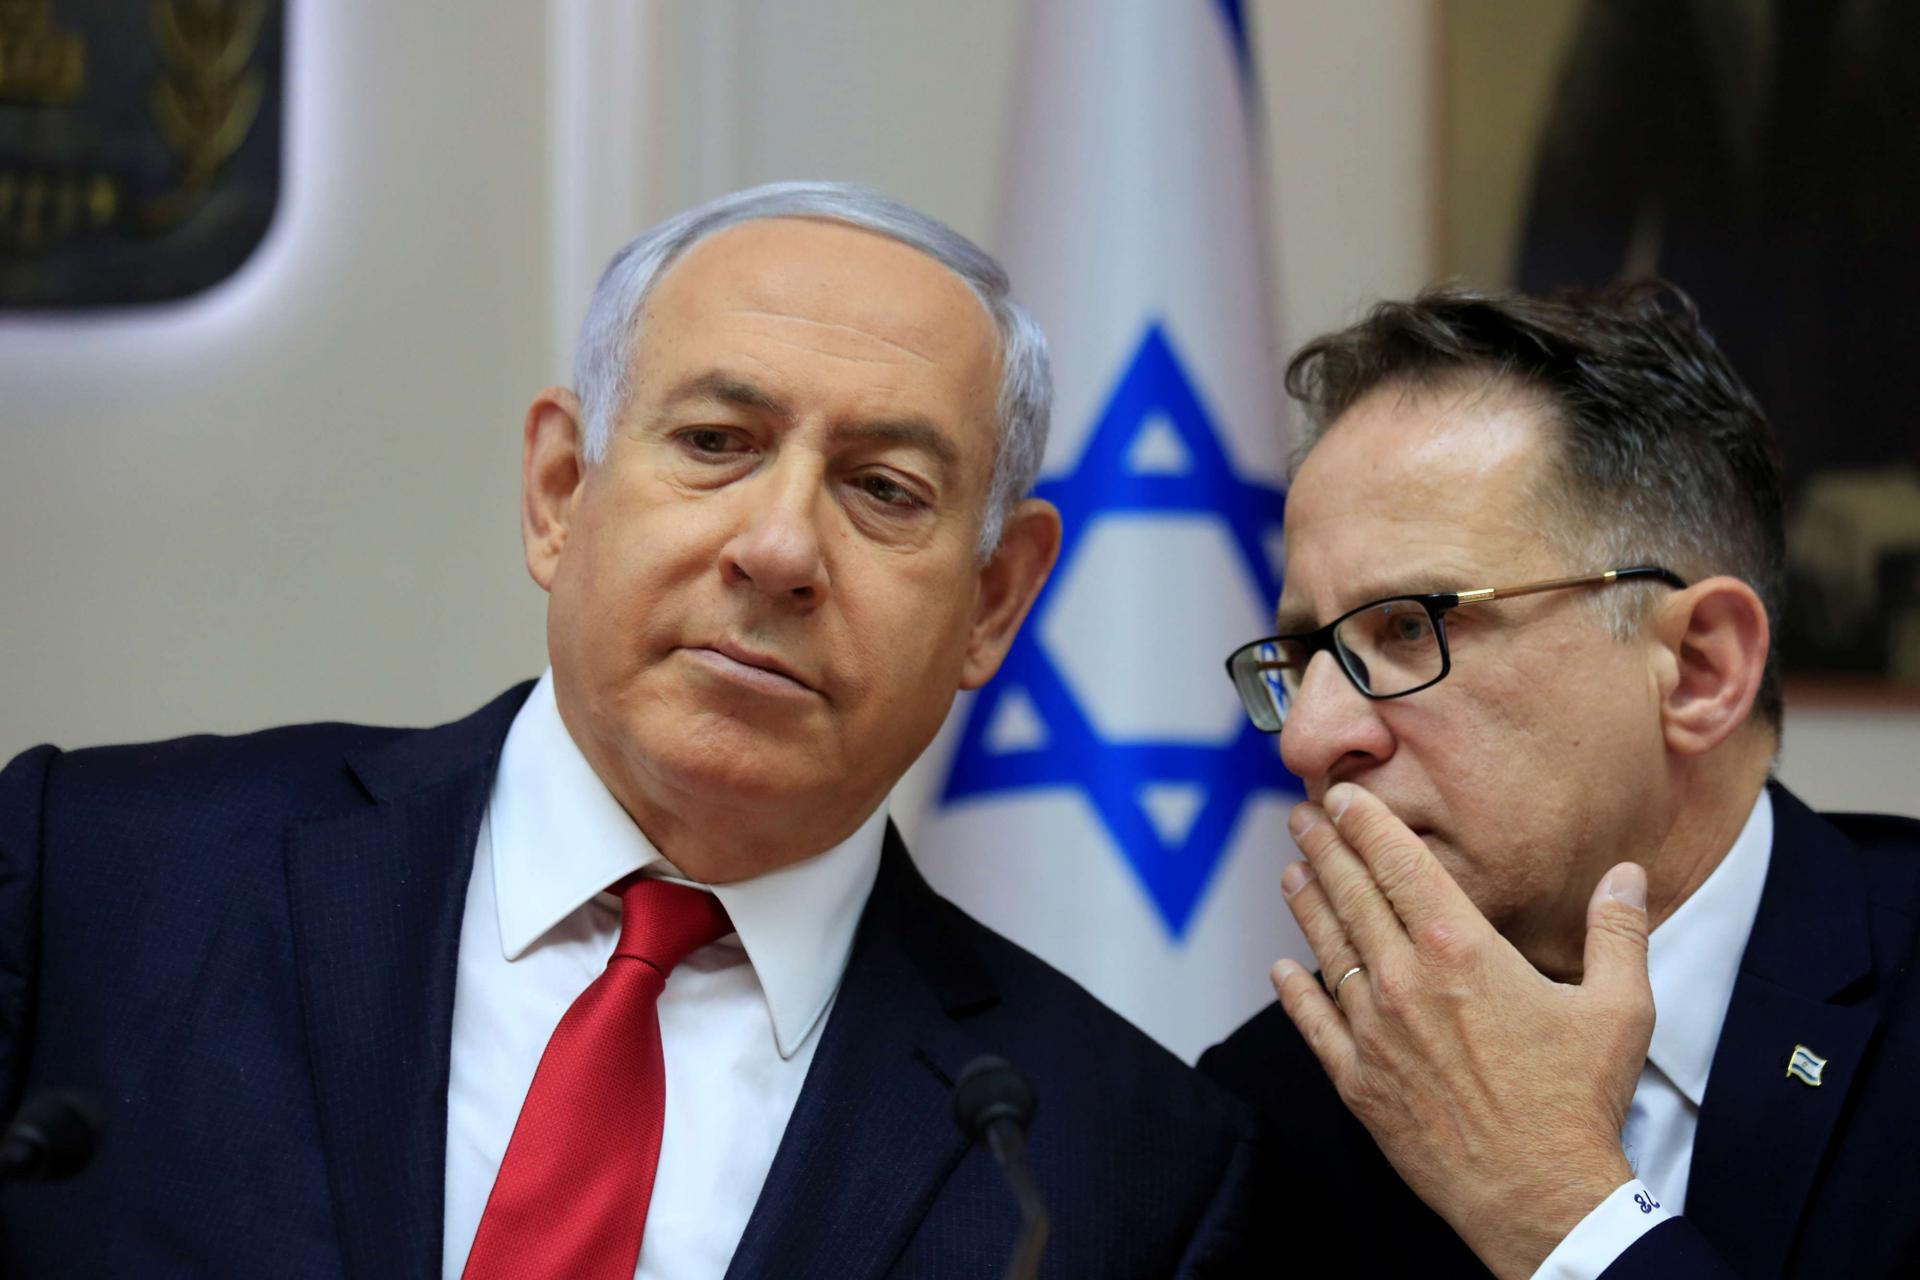 In February, Mandelblit had announced his intention to indict Netanyahu on charges of fraud, breach of trust and bribery